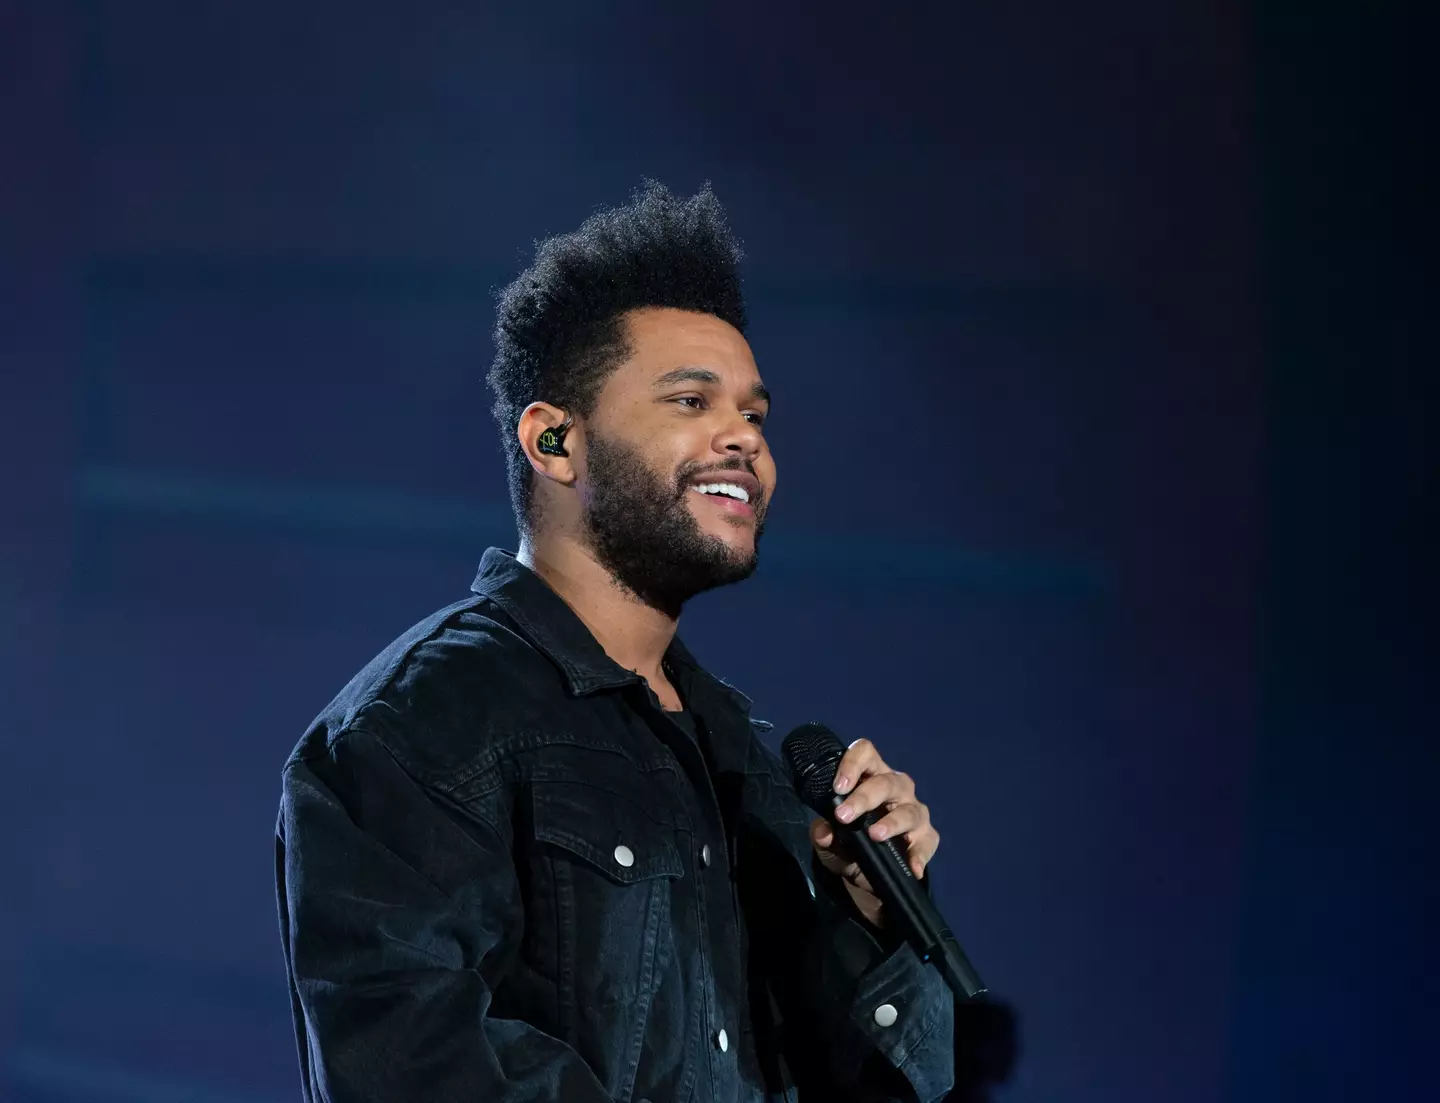 The Weeknd  surprised a six-year-old fan who was photographed crying outside one of his shows.